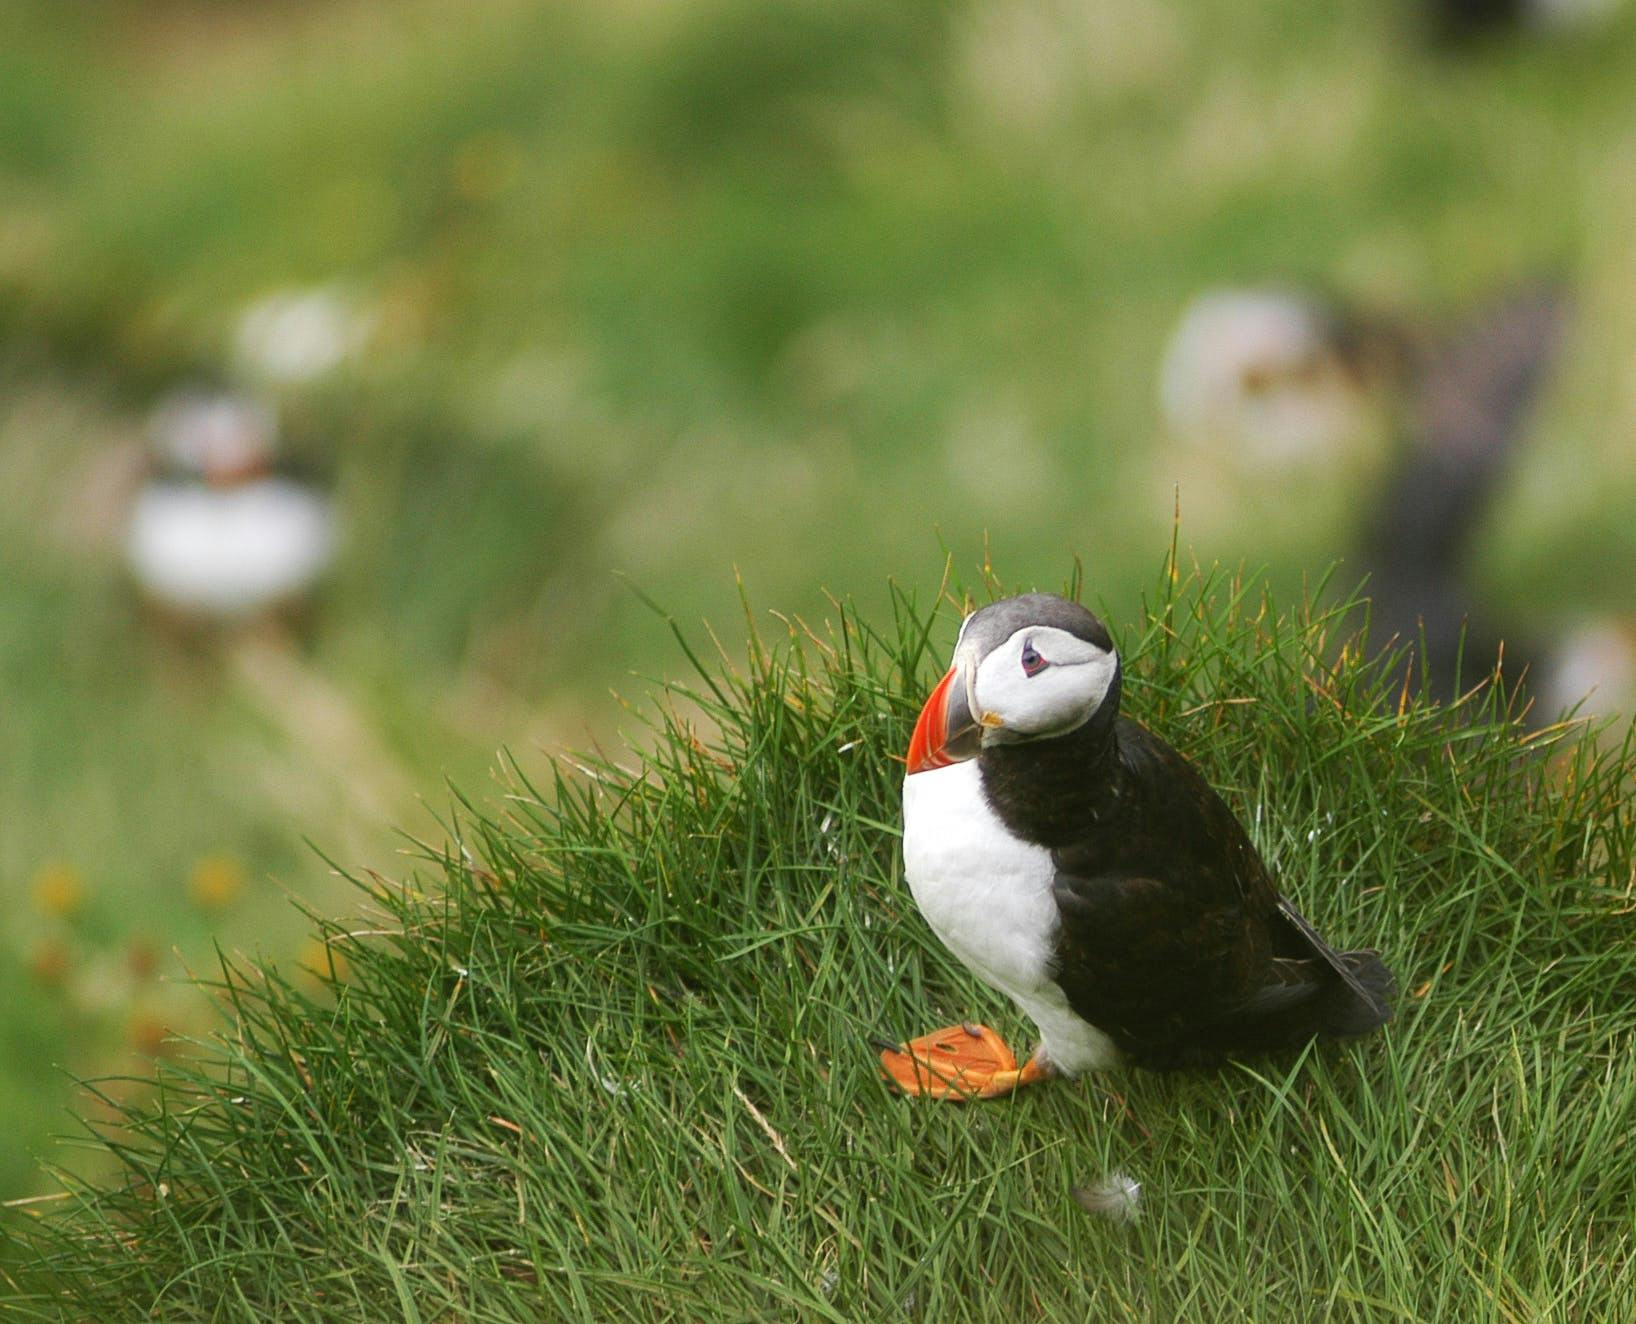 An adorable puffin in the wild.